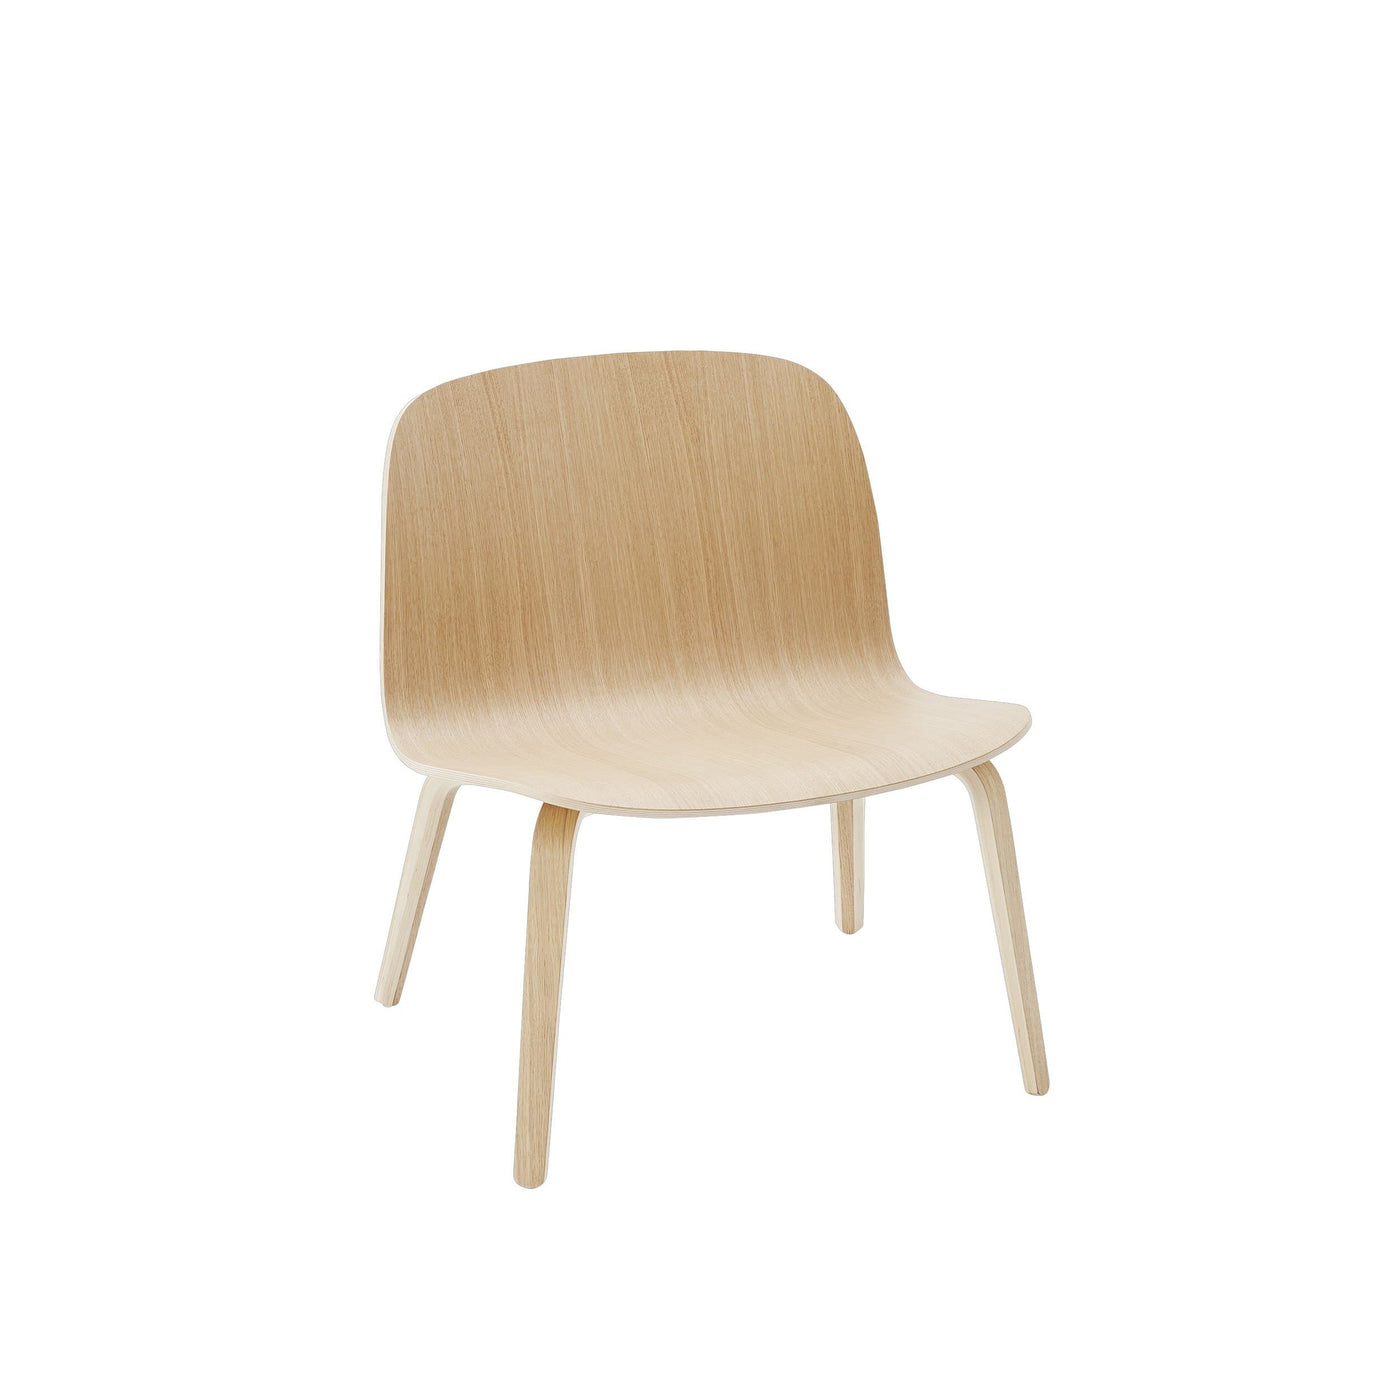 Muuto Visu Lounge Chair in oak, available from someday designs. #colour_oak